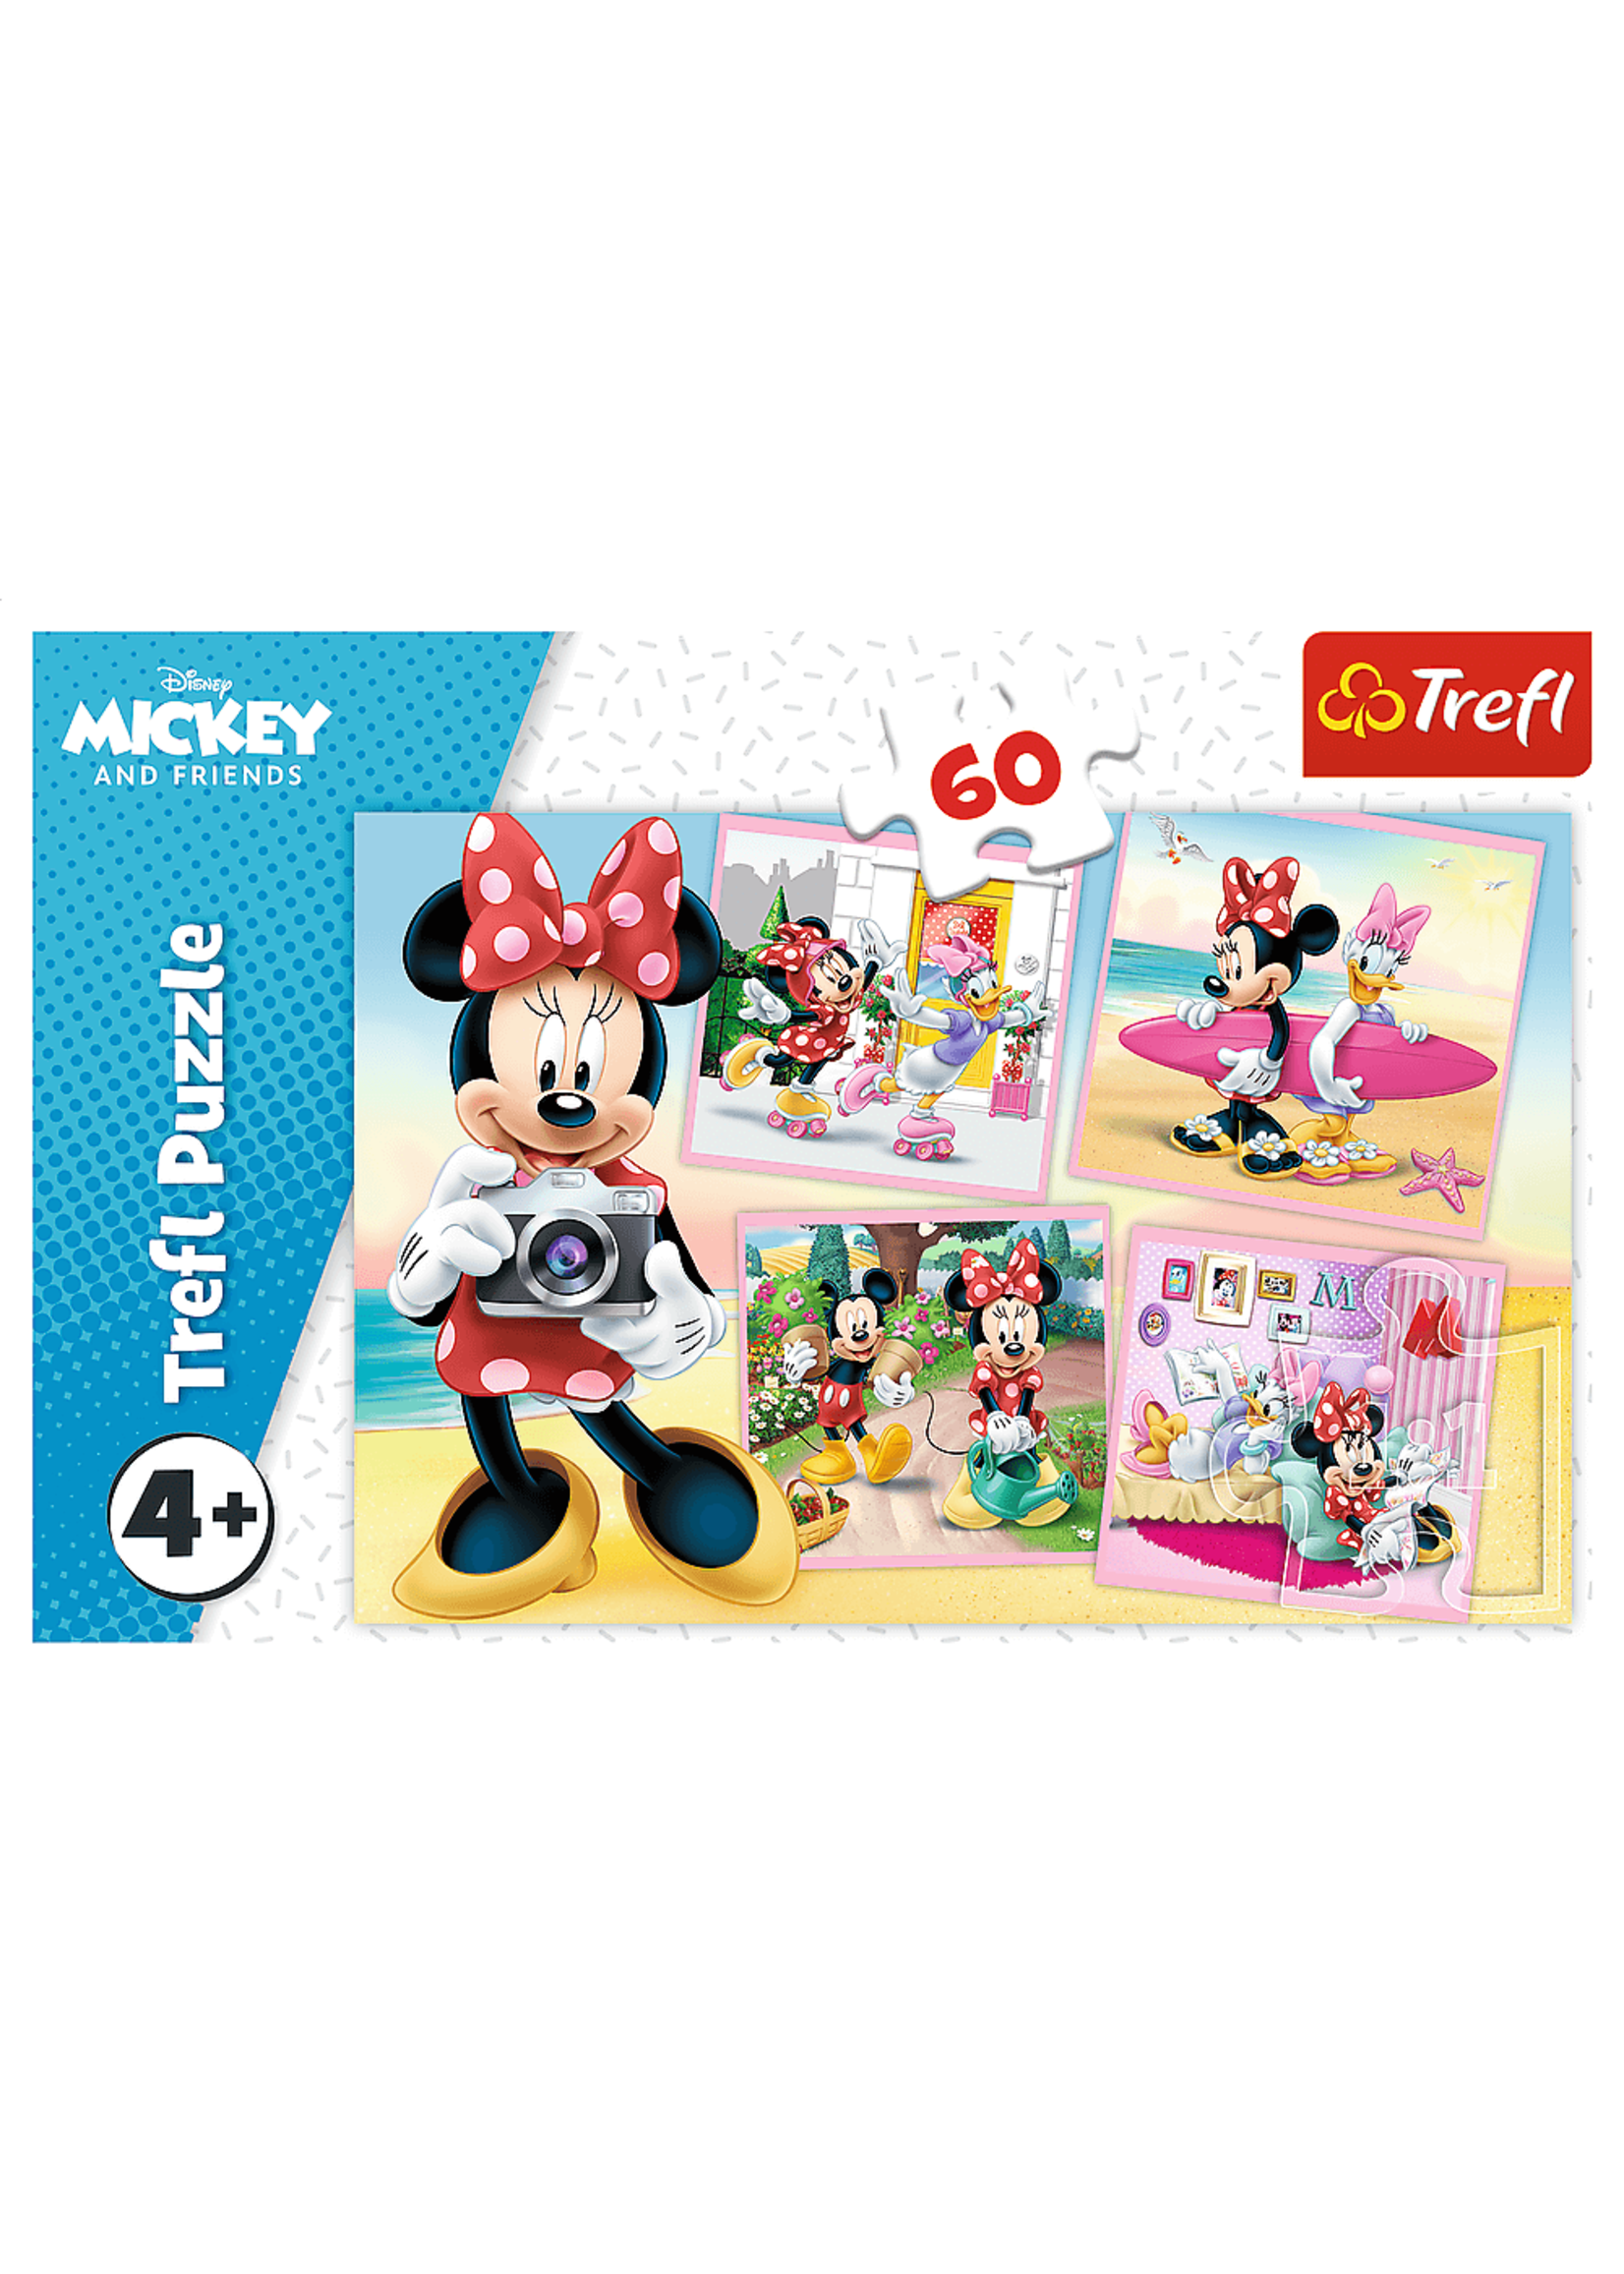 Disney Minnie Mouse puzzle from Disney